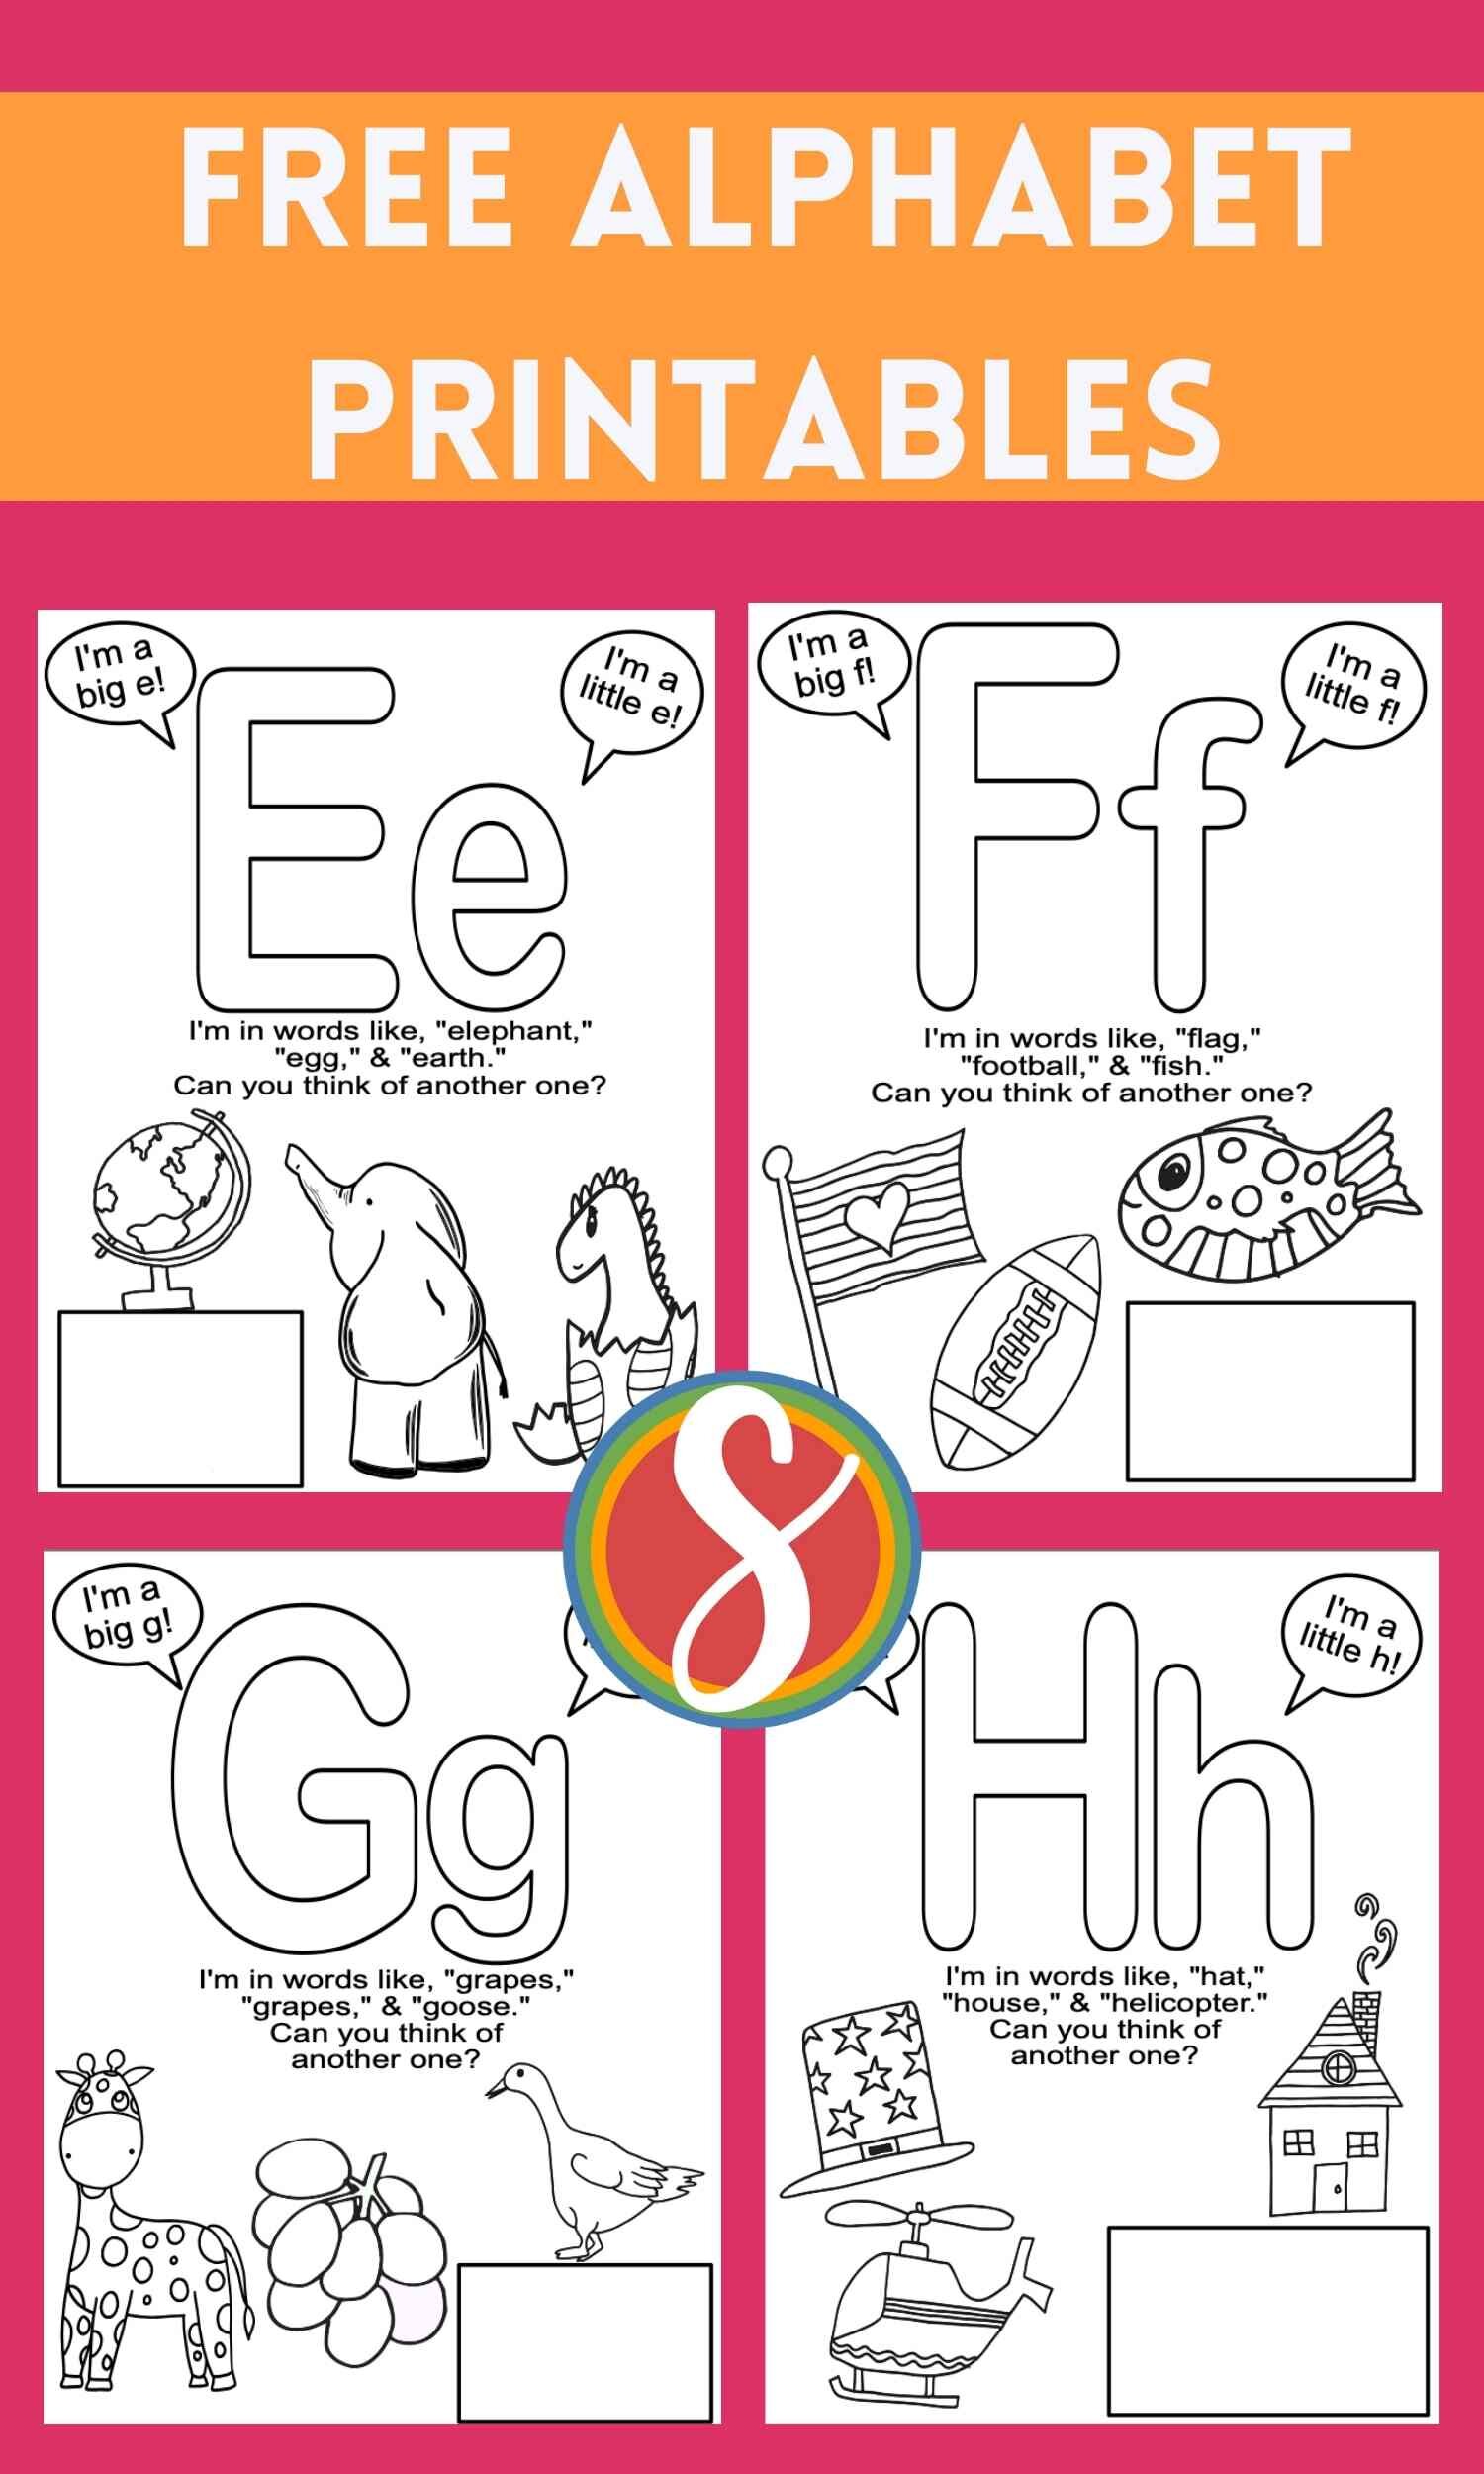 Free preschool alphabet activity sheet to print and color from Stevie Doodles! Grab these 26 free printable abc coloring sheets and print them off for your whole class or just for some fun educational activities at home